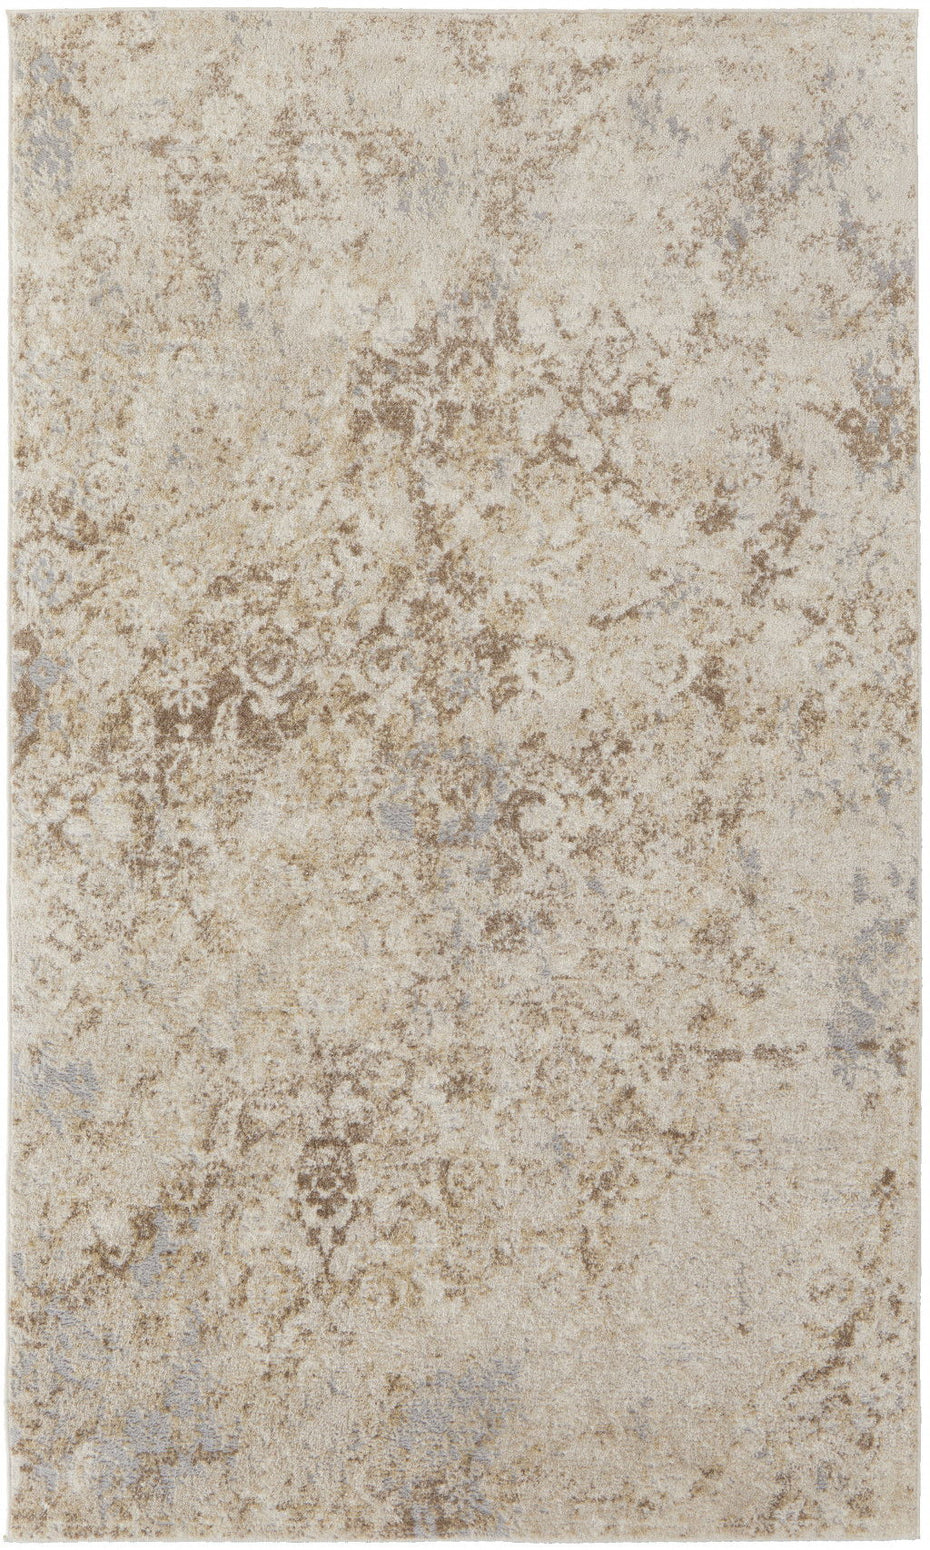 Abstract Power Loom Distressed Area Rug - Tan Silver And Ivory - 8' X 10'